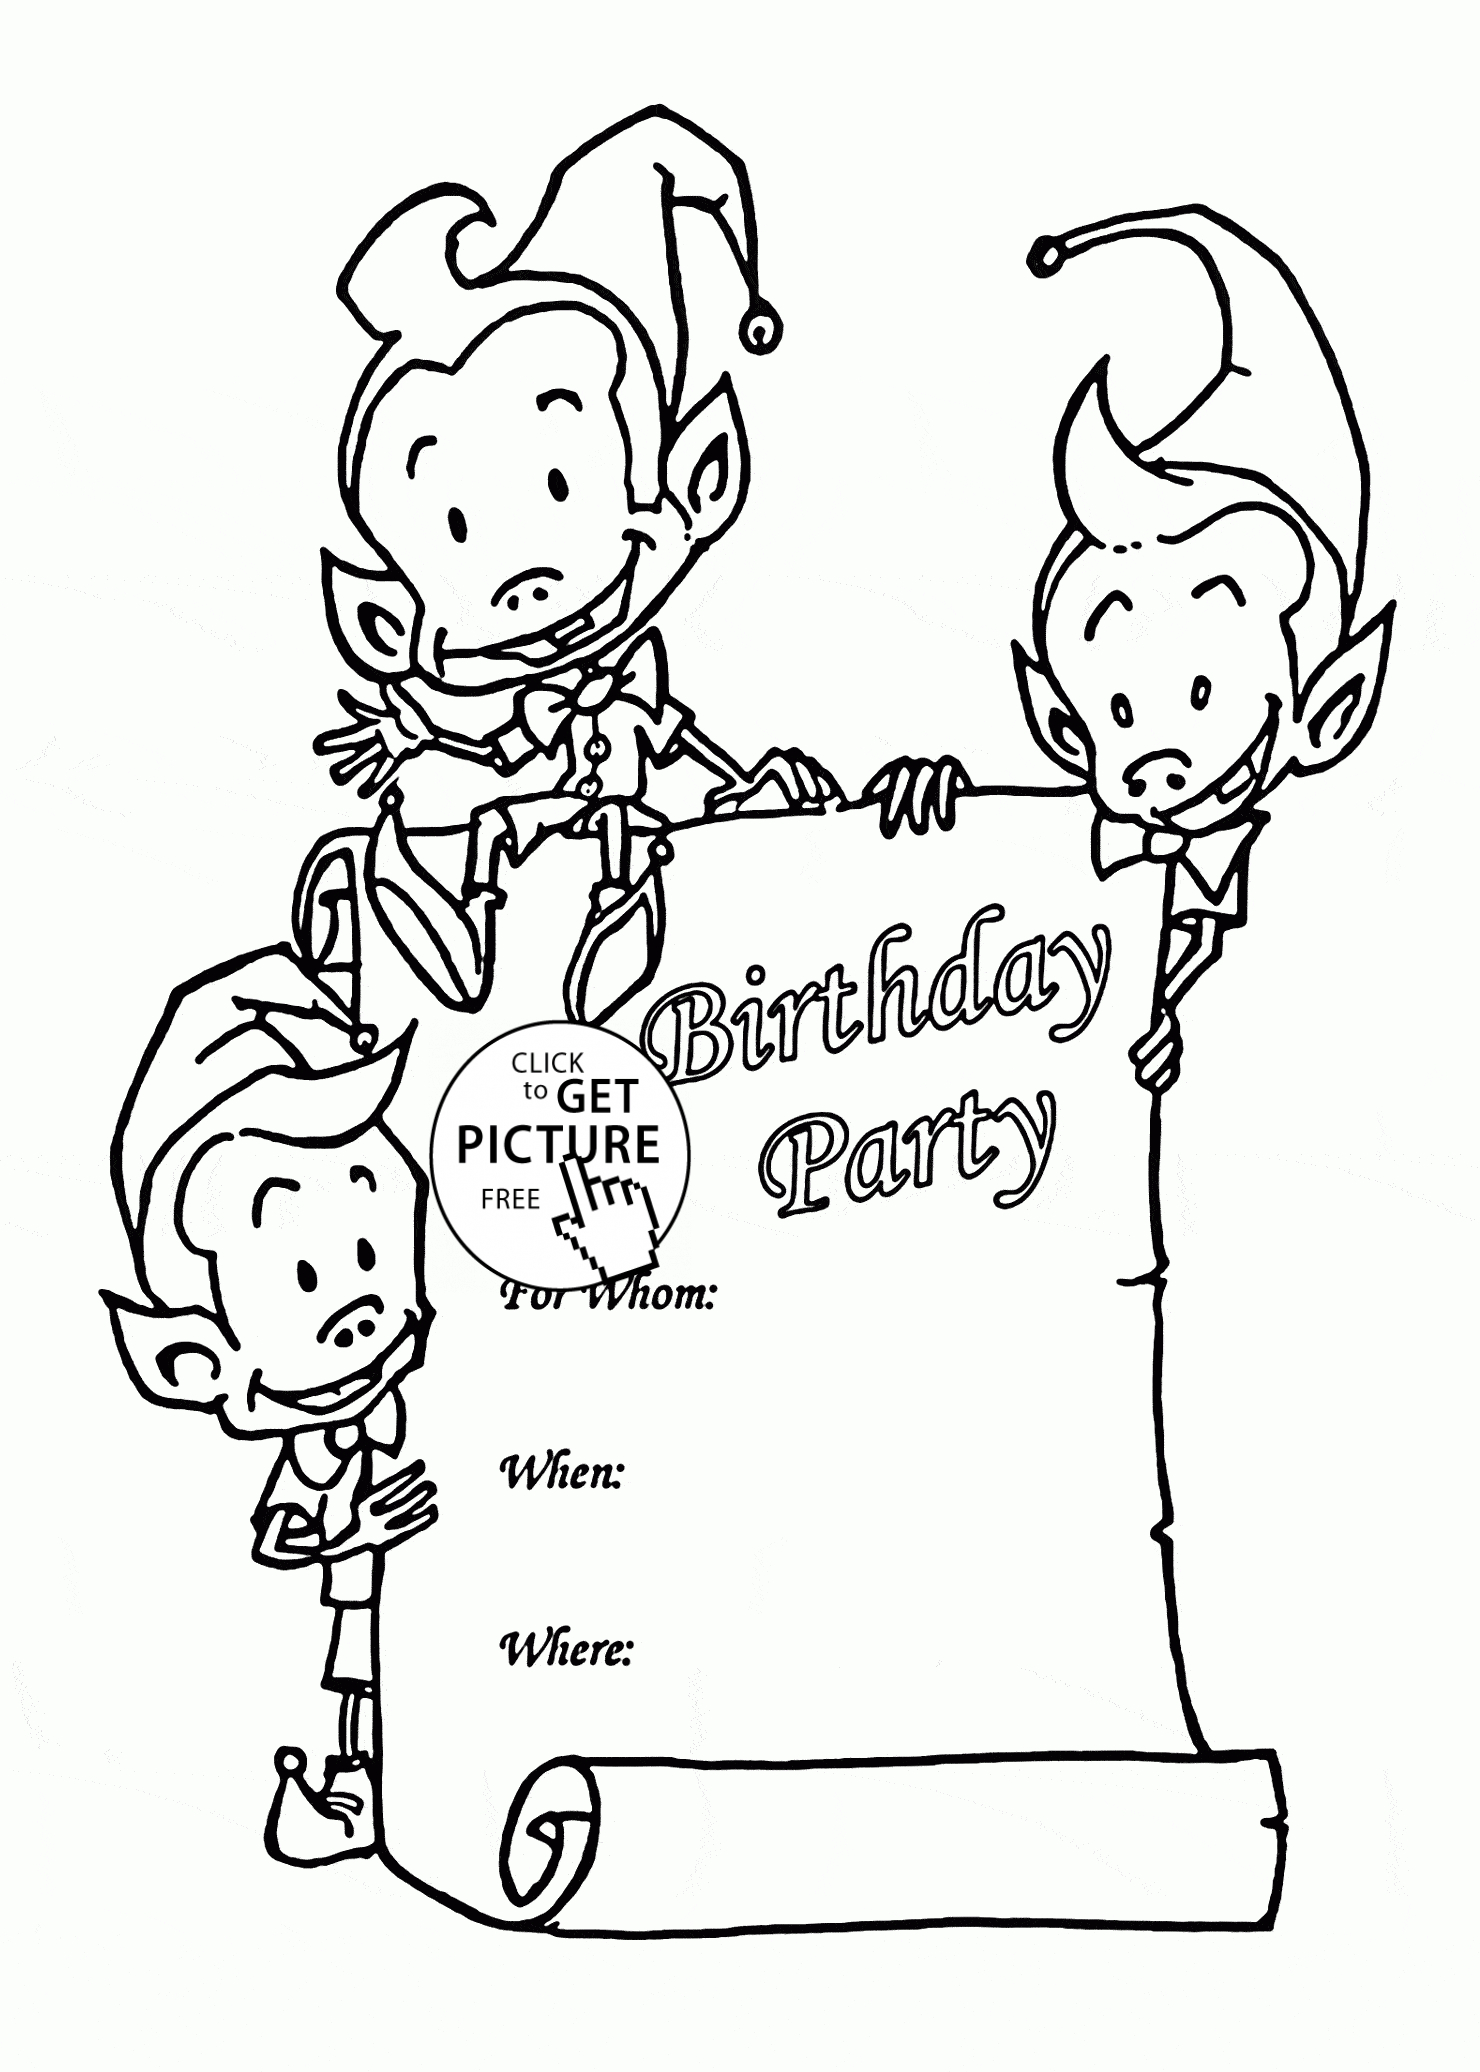 Elf Coloring Pages Printable Birthday Party Card With Funny Elves Coloring Page For Kids Holiday